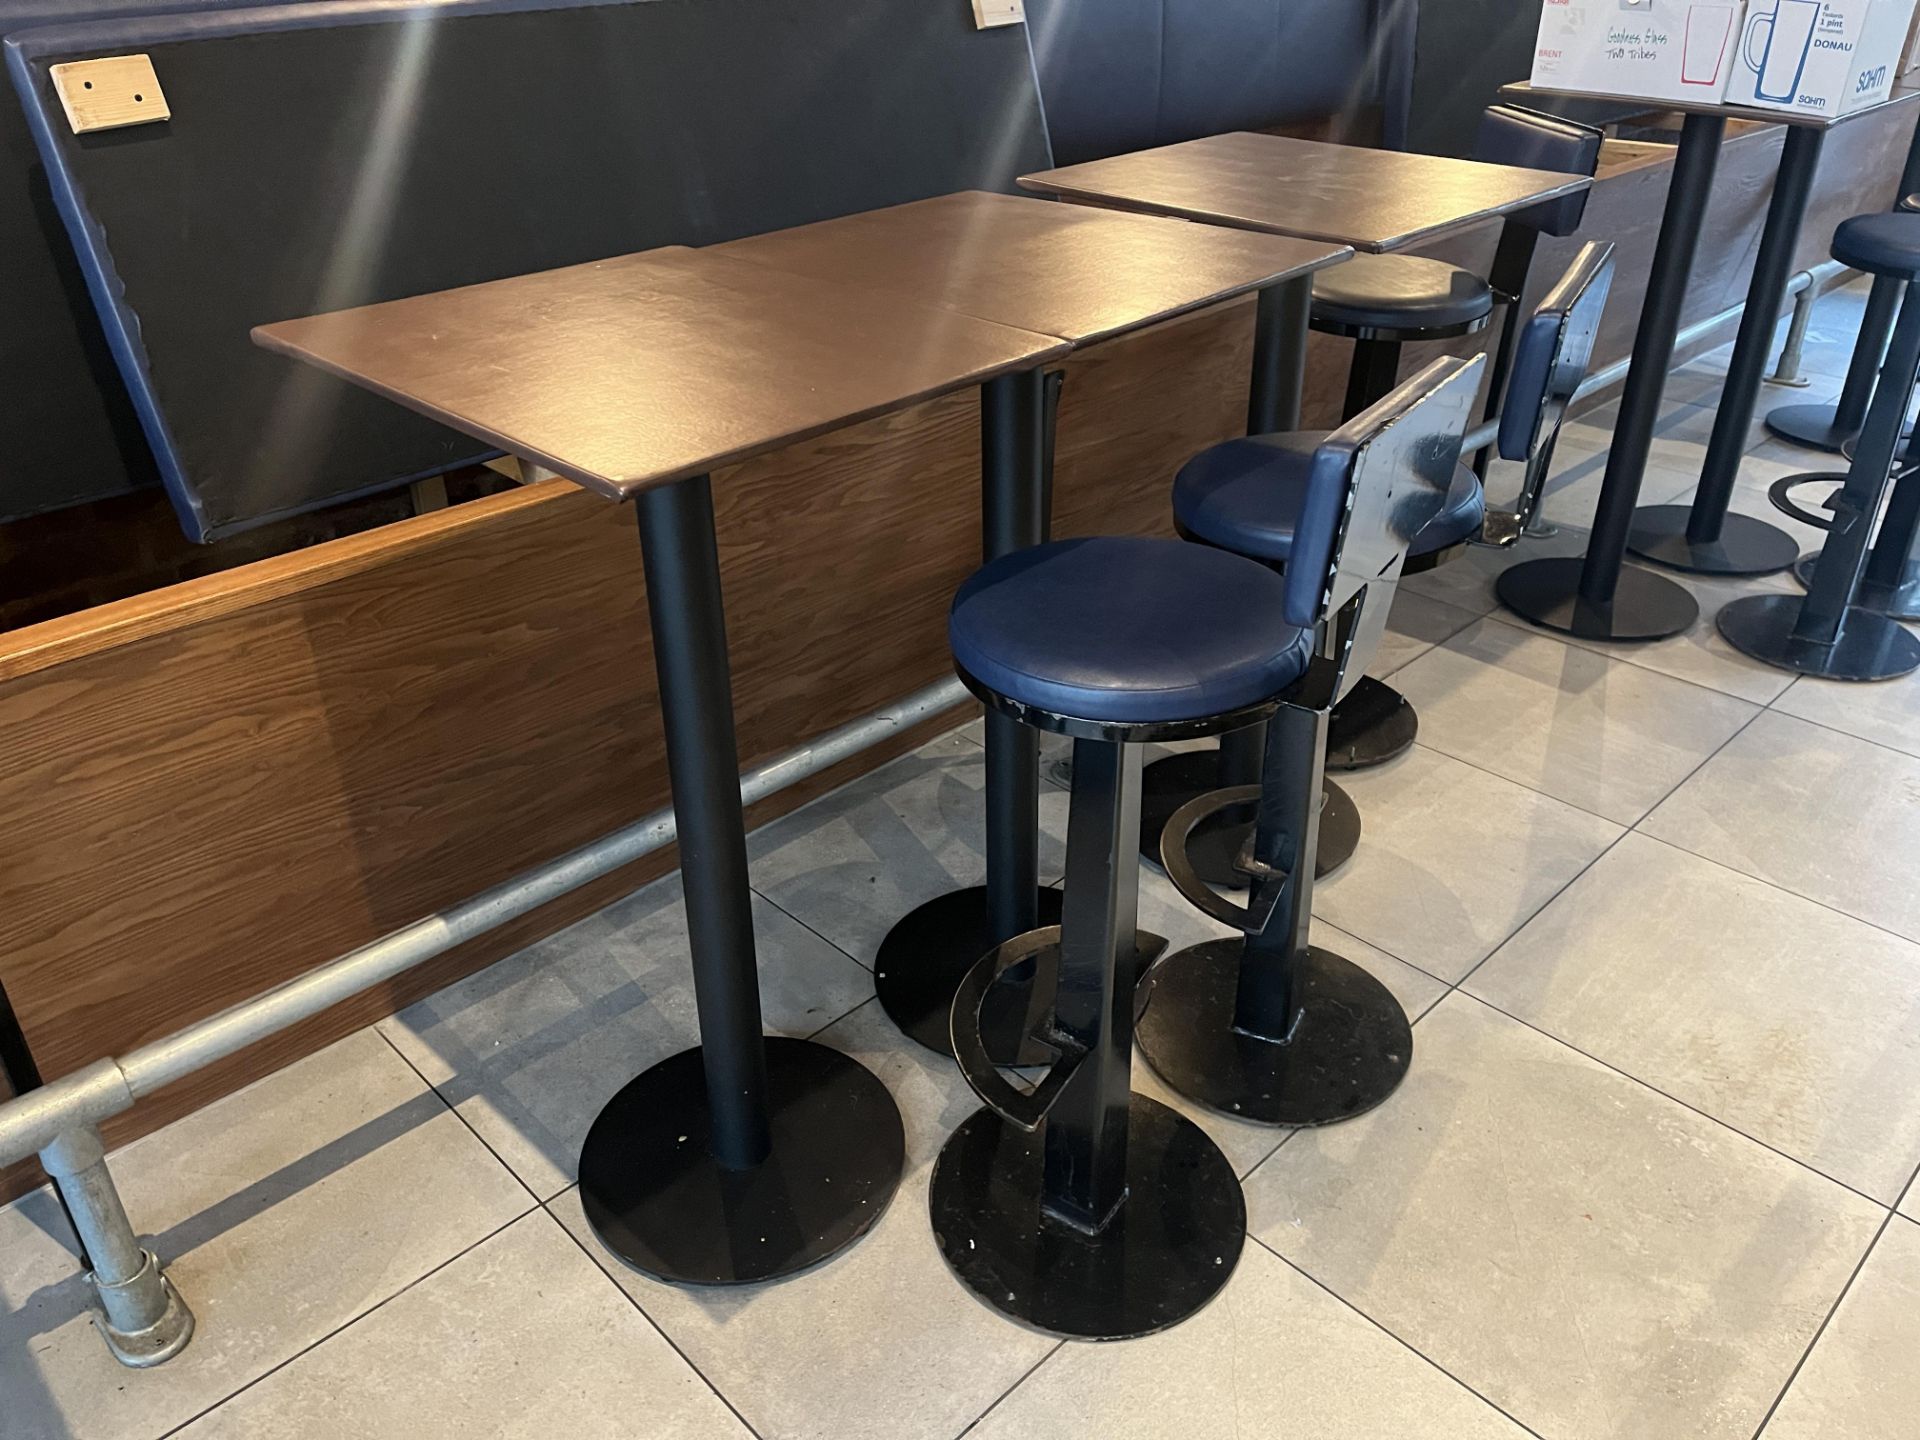 3 TALL TABLES WITH 3 BARSTOOLS